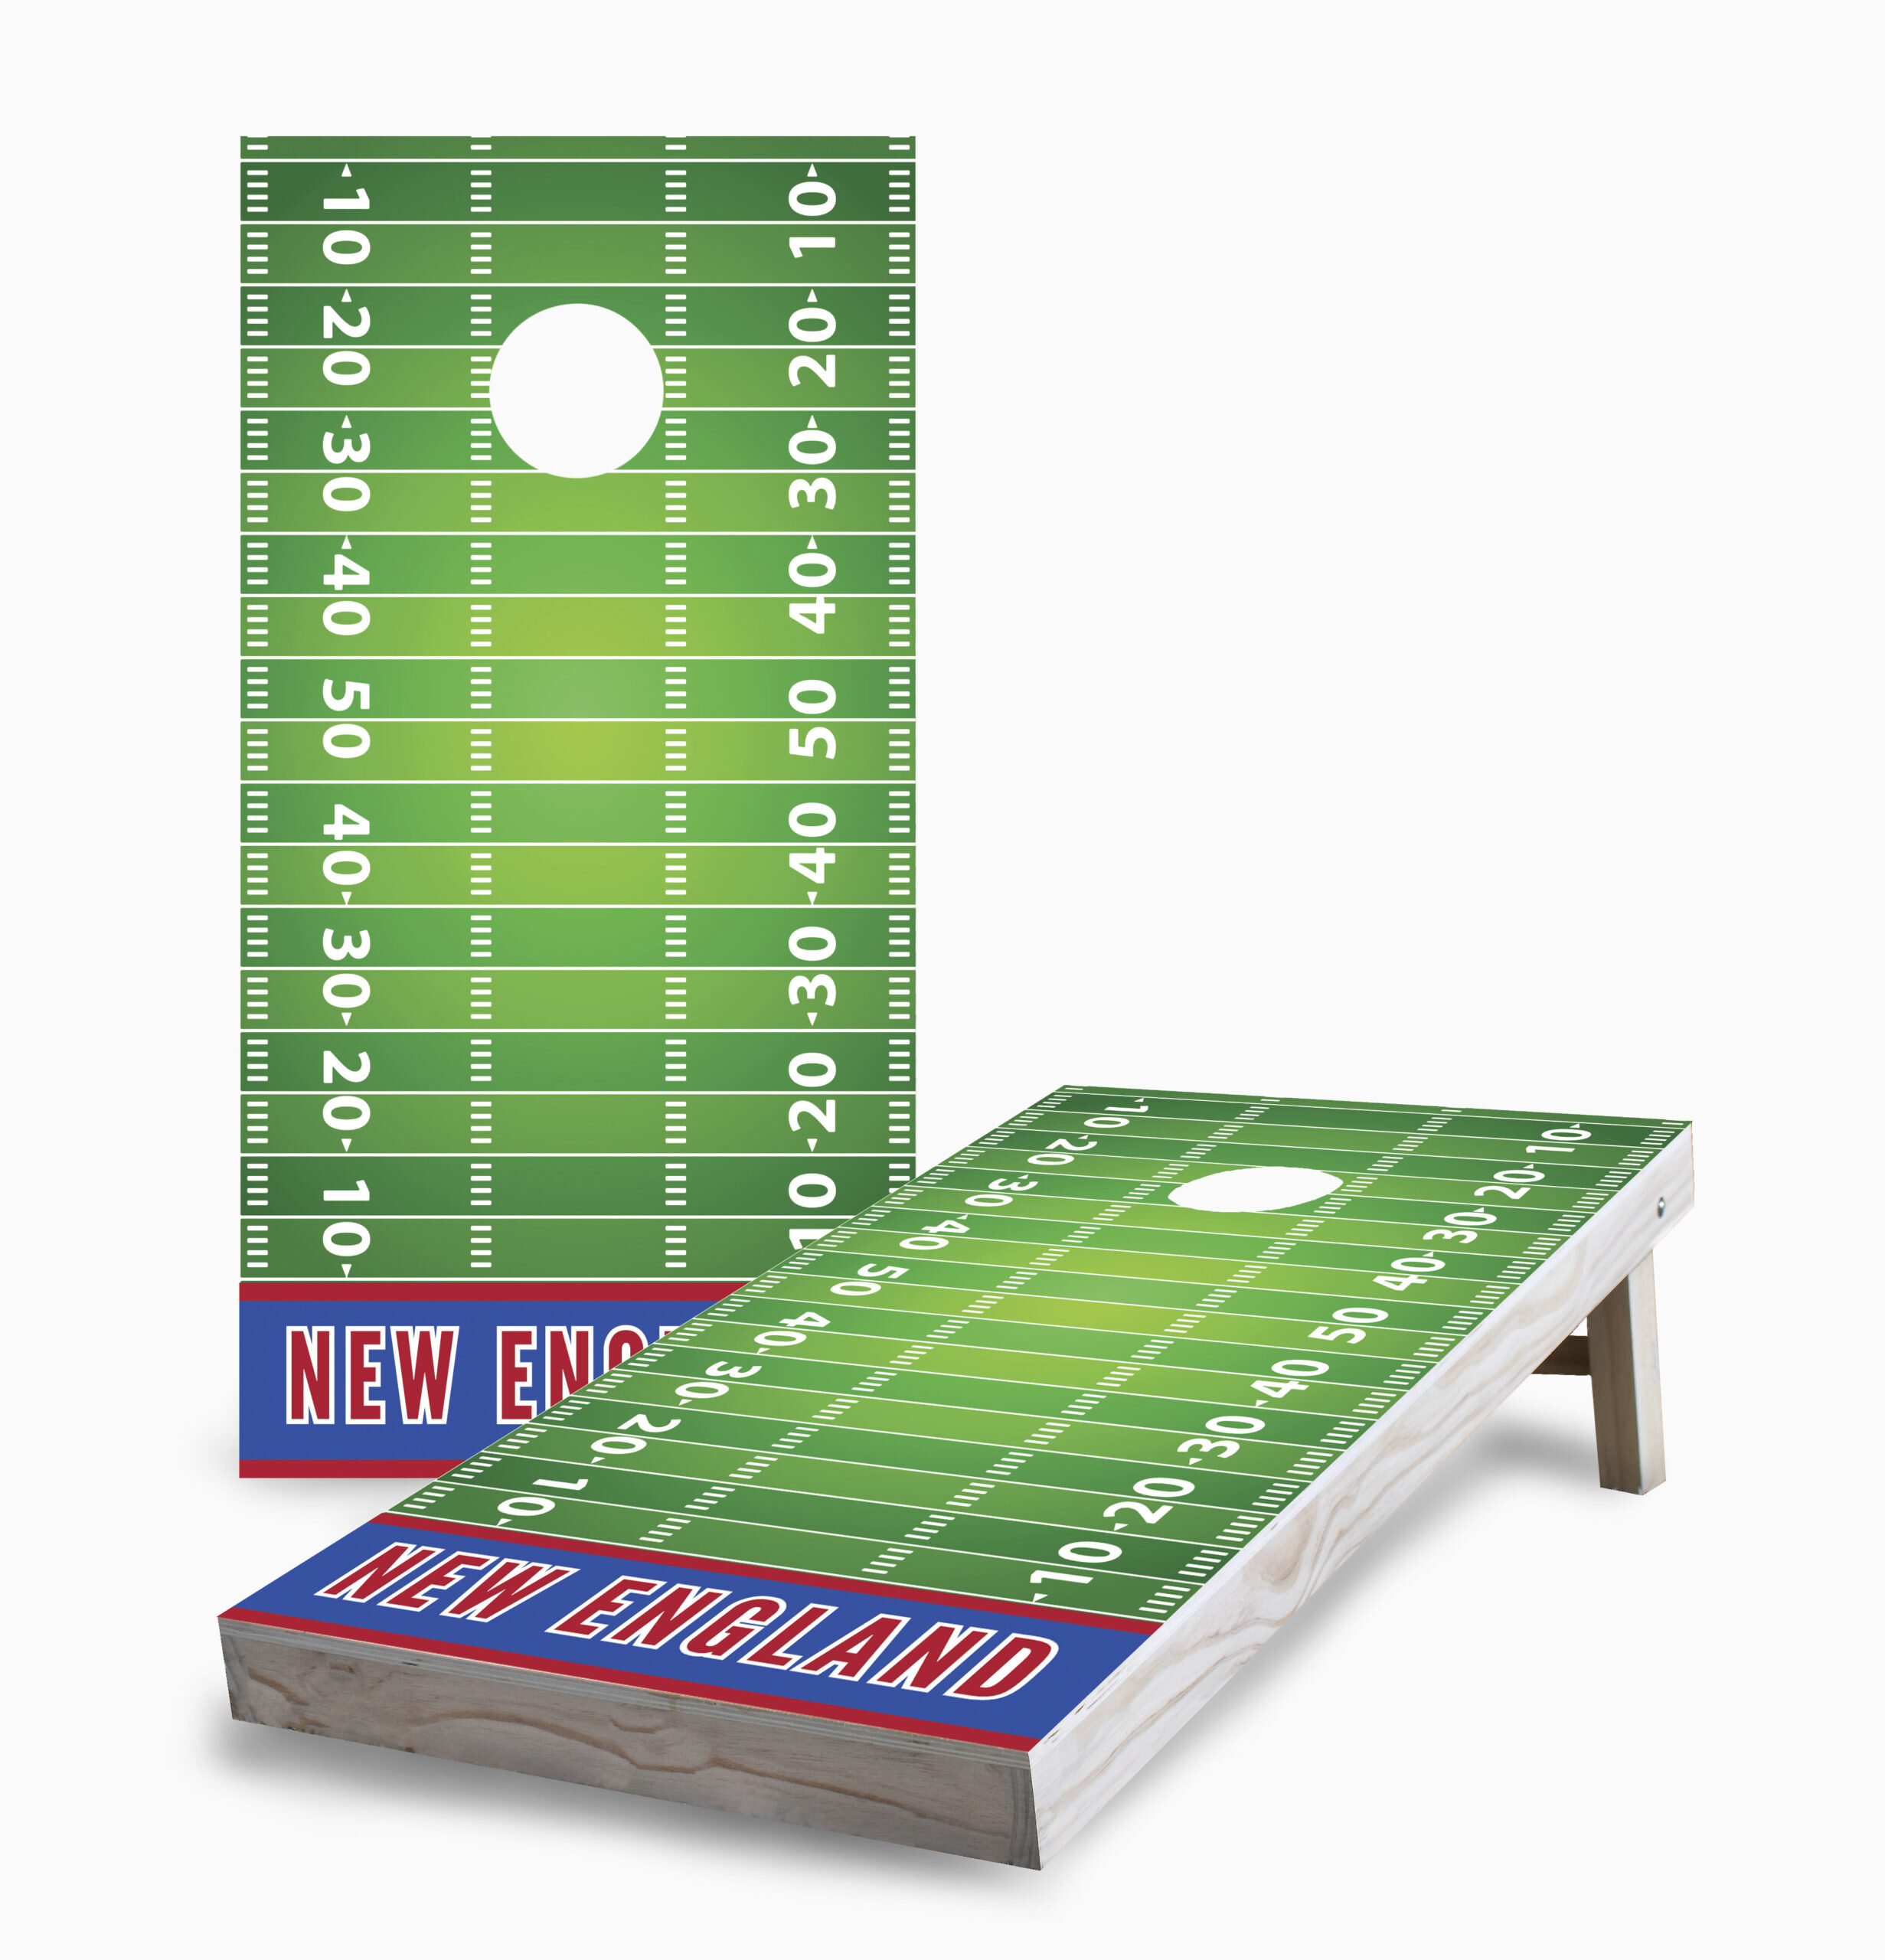 Tailgate360 Portable Regulation Size Bean Bag and Corn Hole Toss Set for sale online 